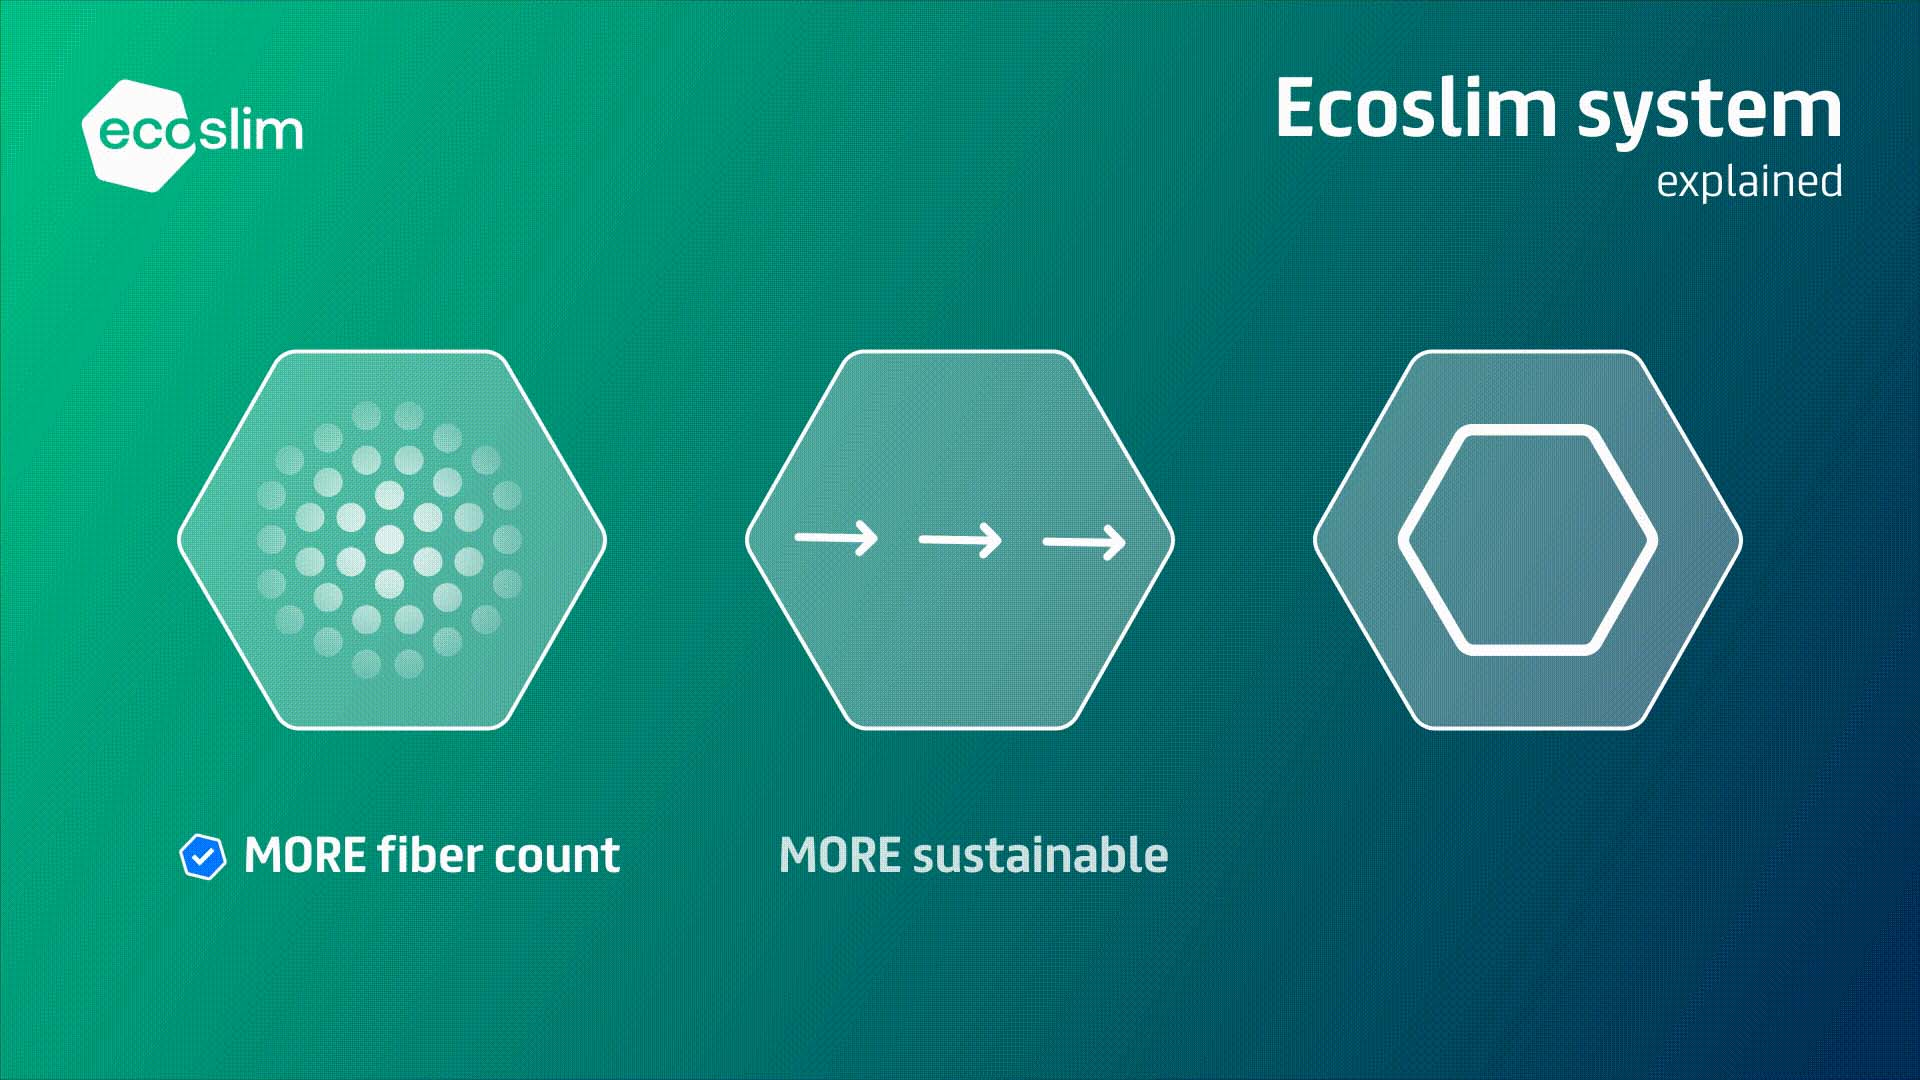 Prysmian launches Ecoslim™, the fibre-optic system with up to 90% recycled plastic and record reduce